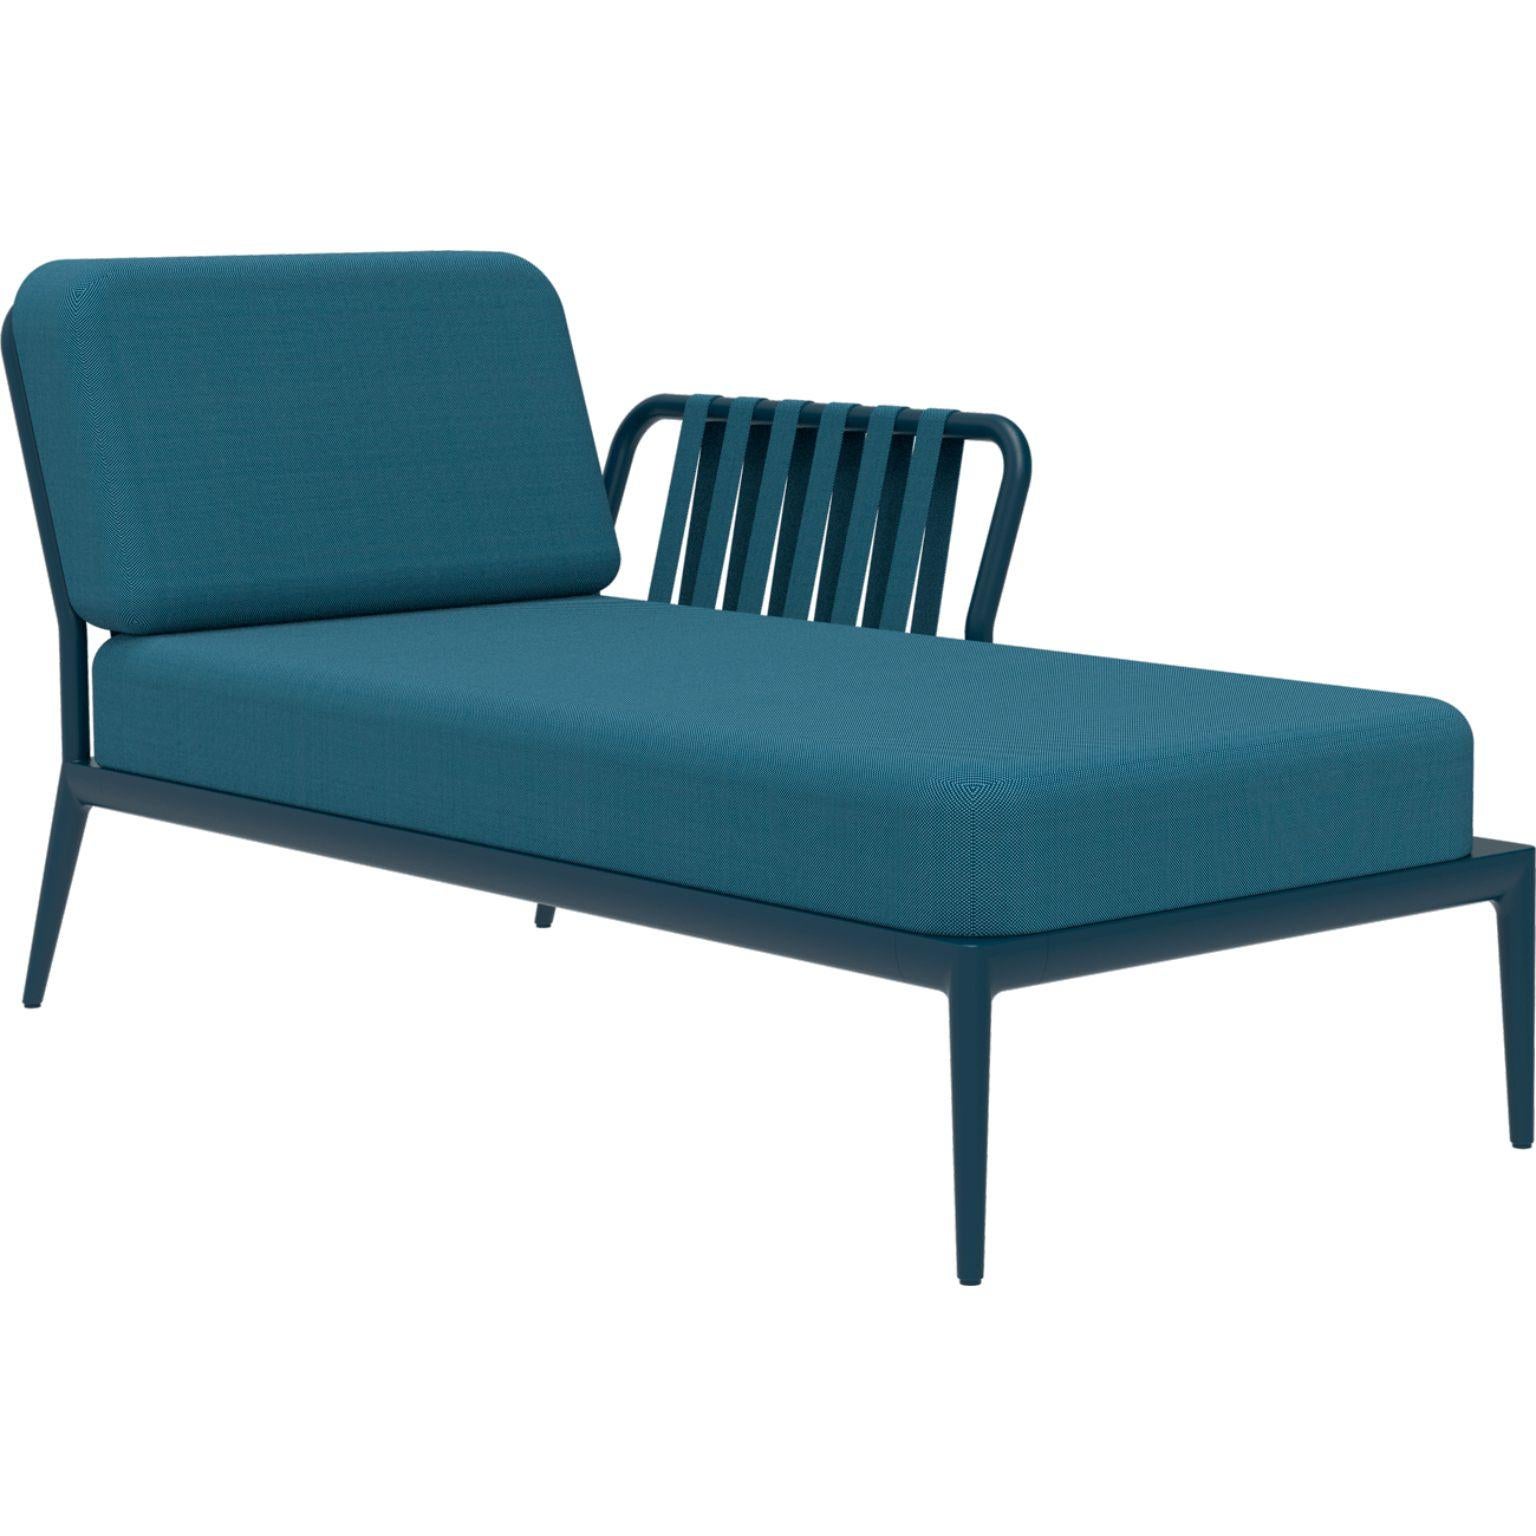 Ribbons Navy Left Chaise Longue by MOWEE
Dimensions: D80 x W155 x H81 cm
Material: Aluminum, Upholstery
Weight: 28 kg
Also Available in different colors and finishes. 

An unmistakable collection for its beauty and robustness. A tribute to the